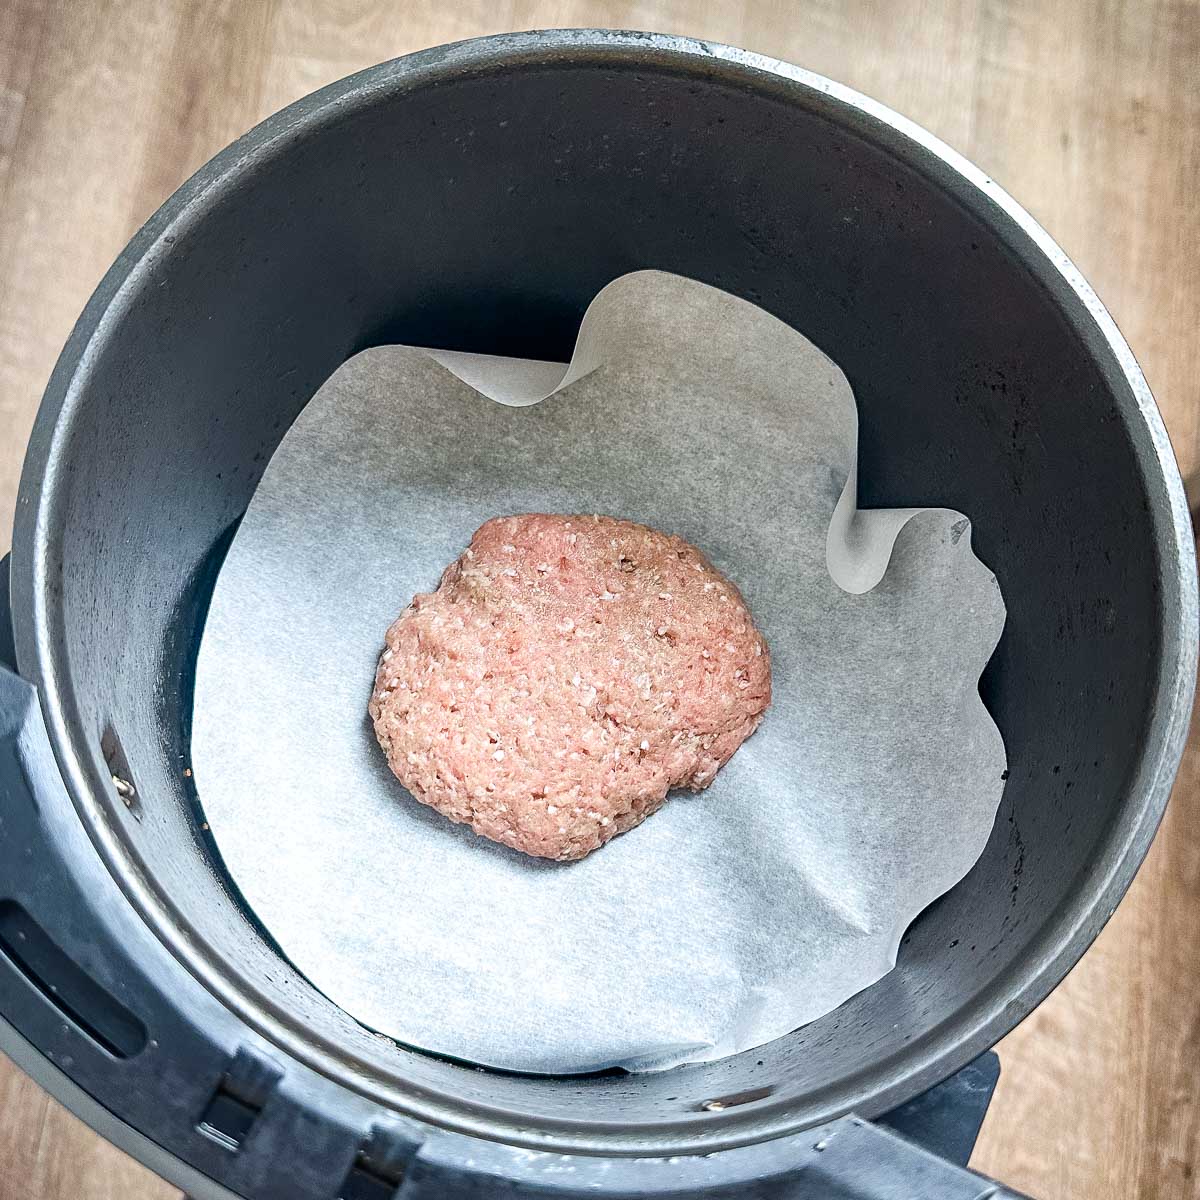 A raw air fryer turkey burger is shown in the air fryer basket lined with parchment paper.